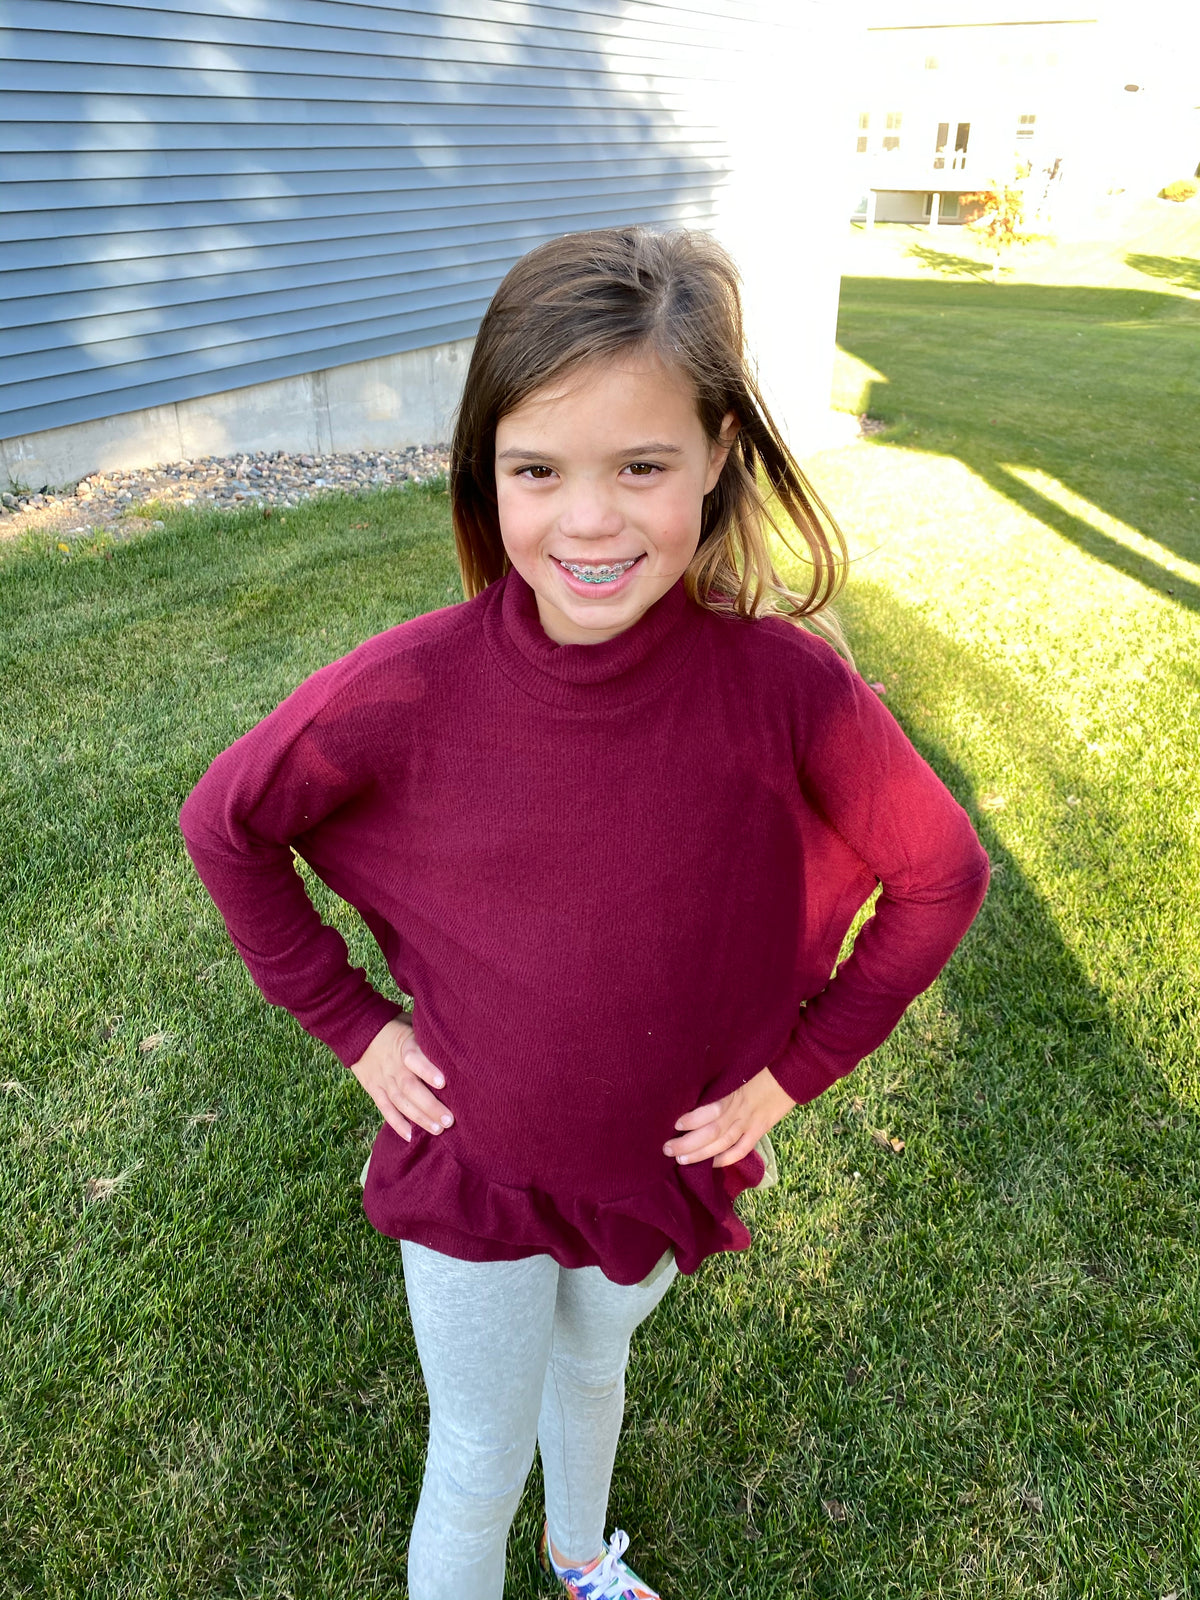 Cowl Neck Poncho Tunic For Kids - FLASH SALE